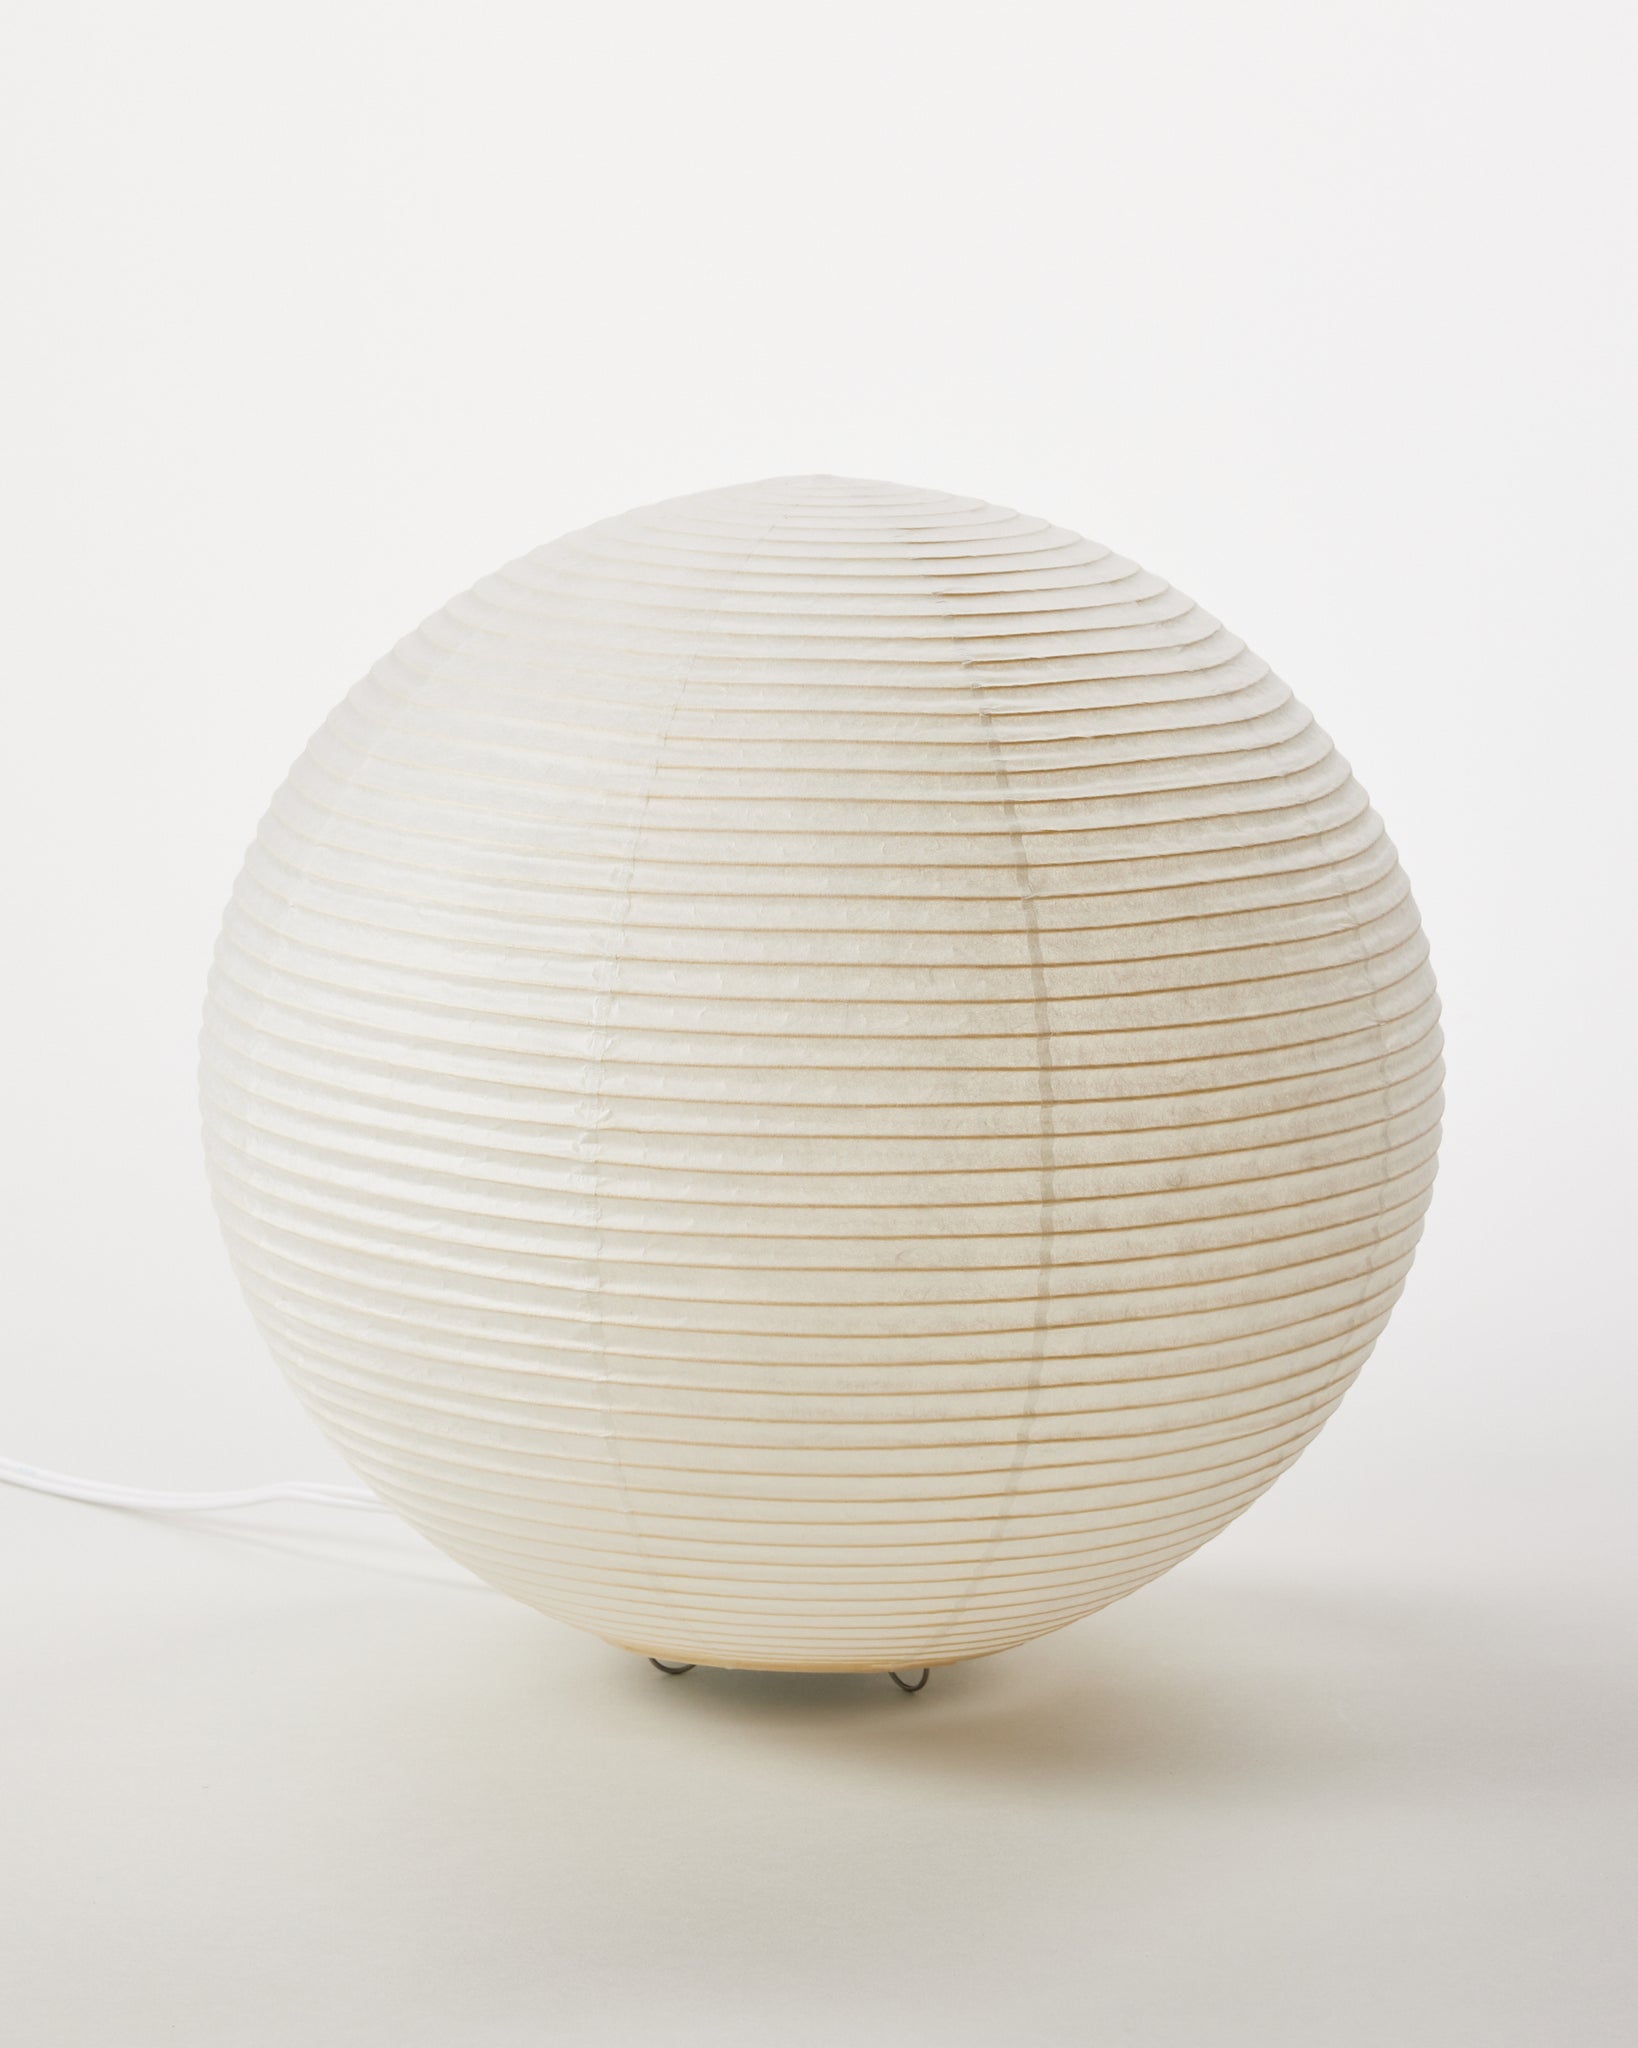 Japanese Paper Table Lamp